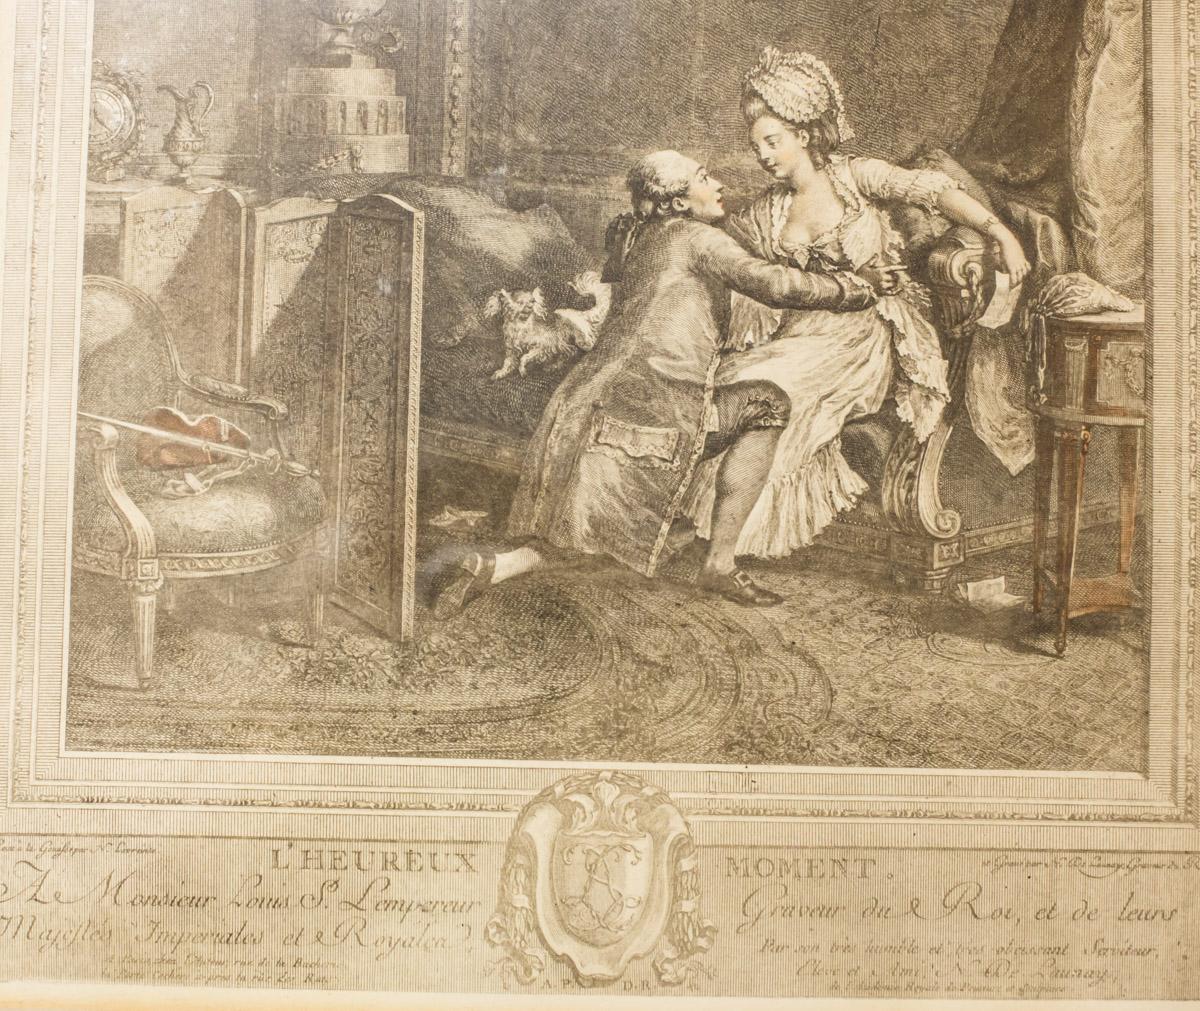 French 18th Century Engraving by Nicolaus de Launay